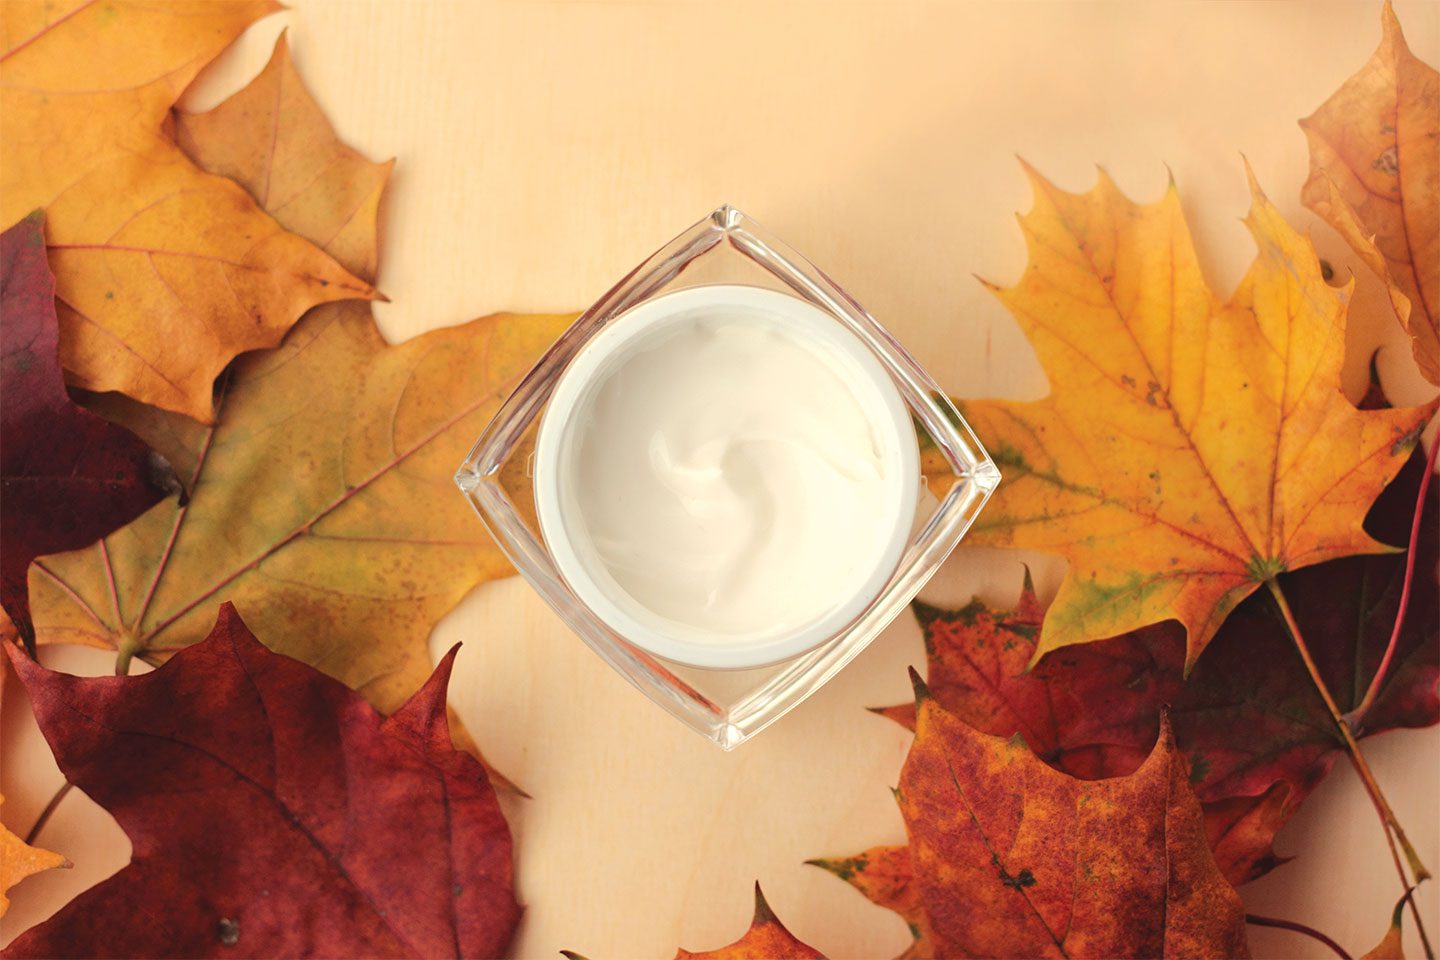 container of moisturizer on a background with leaves